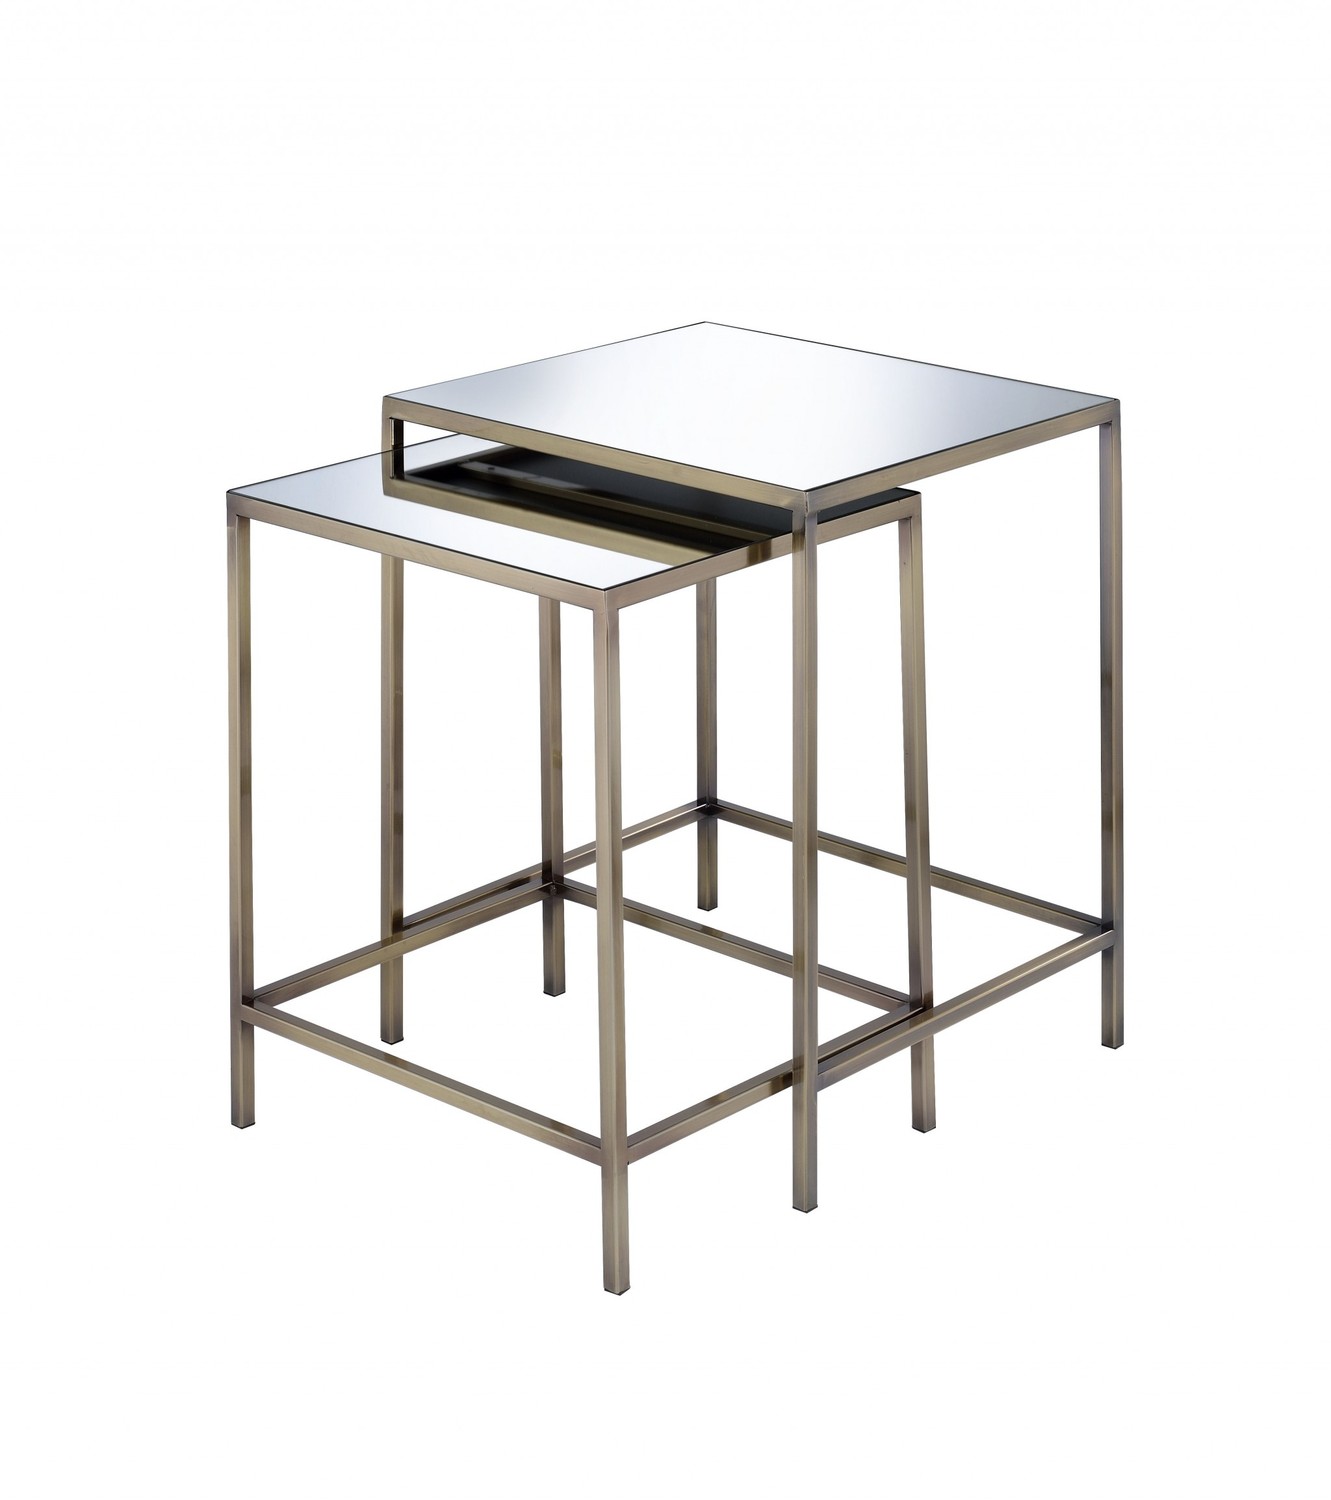 Set of Two Modern Glass and Metal Nesting Tables